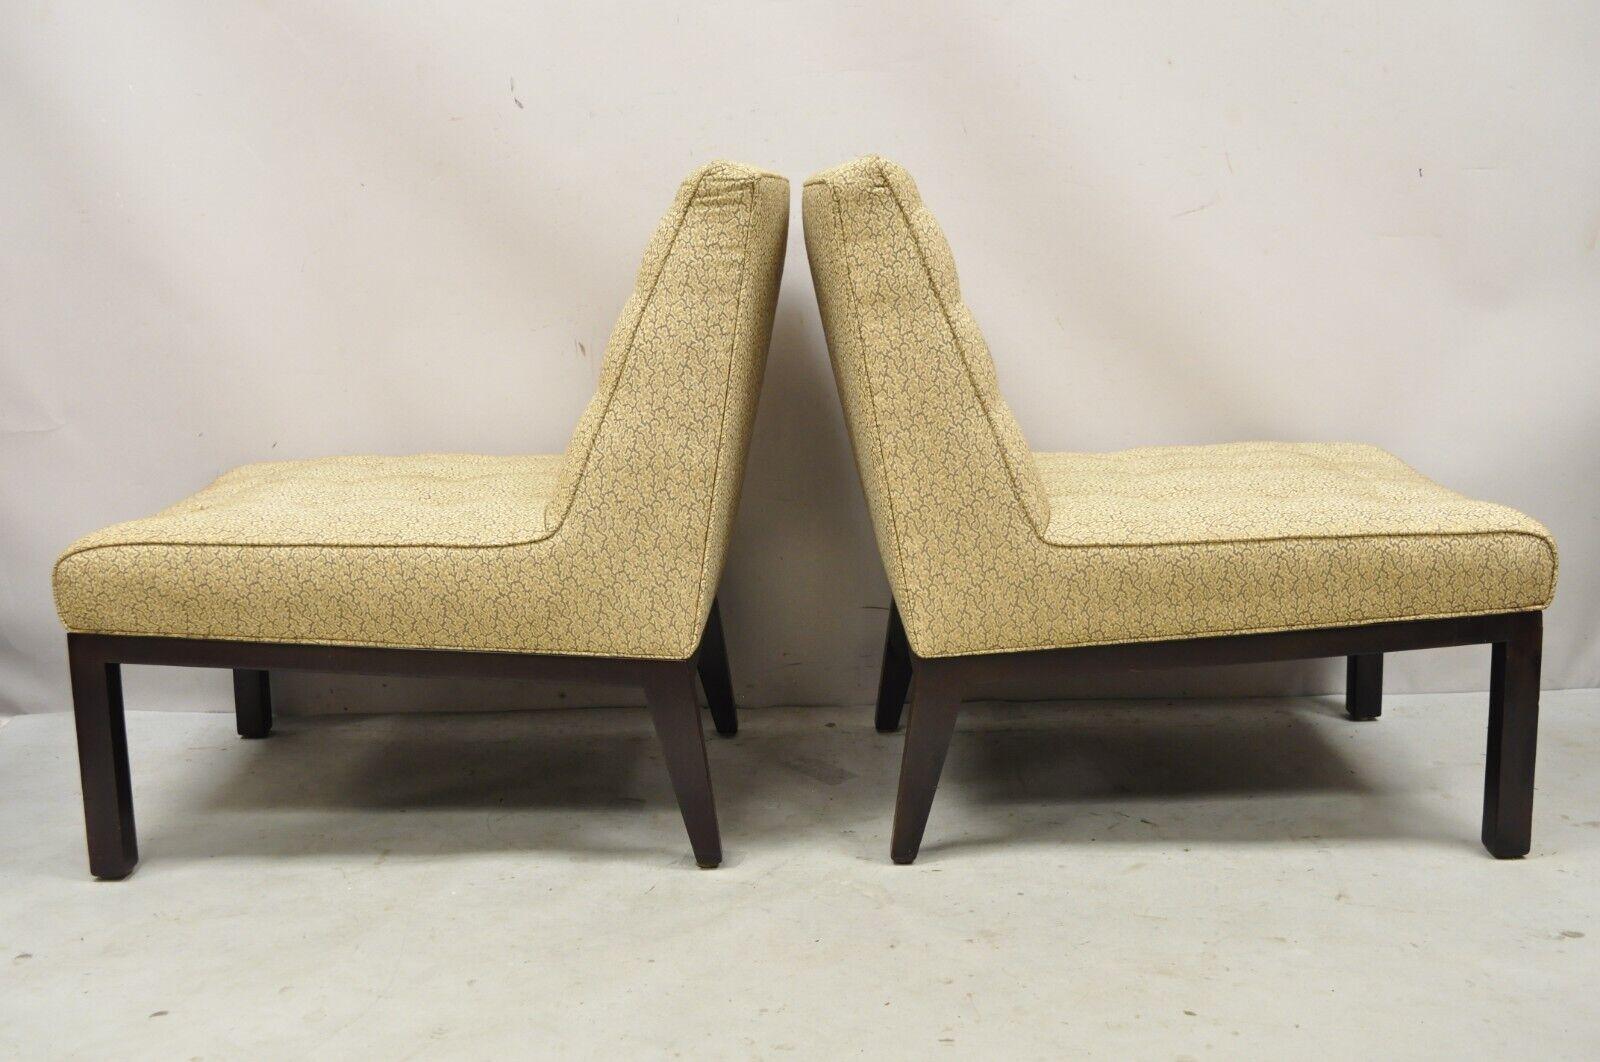 Edward Wormley for Dunbar Wood Frame Slipper Lounge Chairs, a Pair For Sale 2